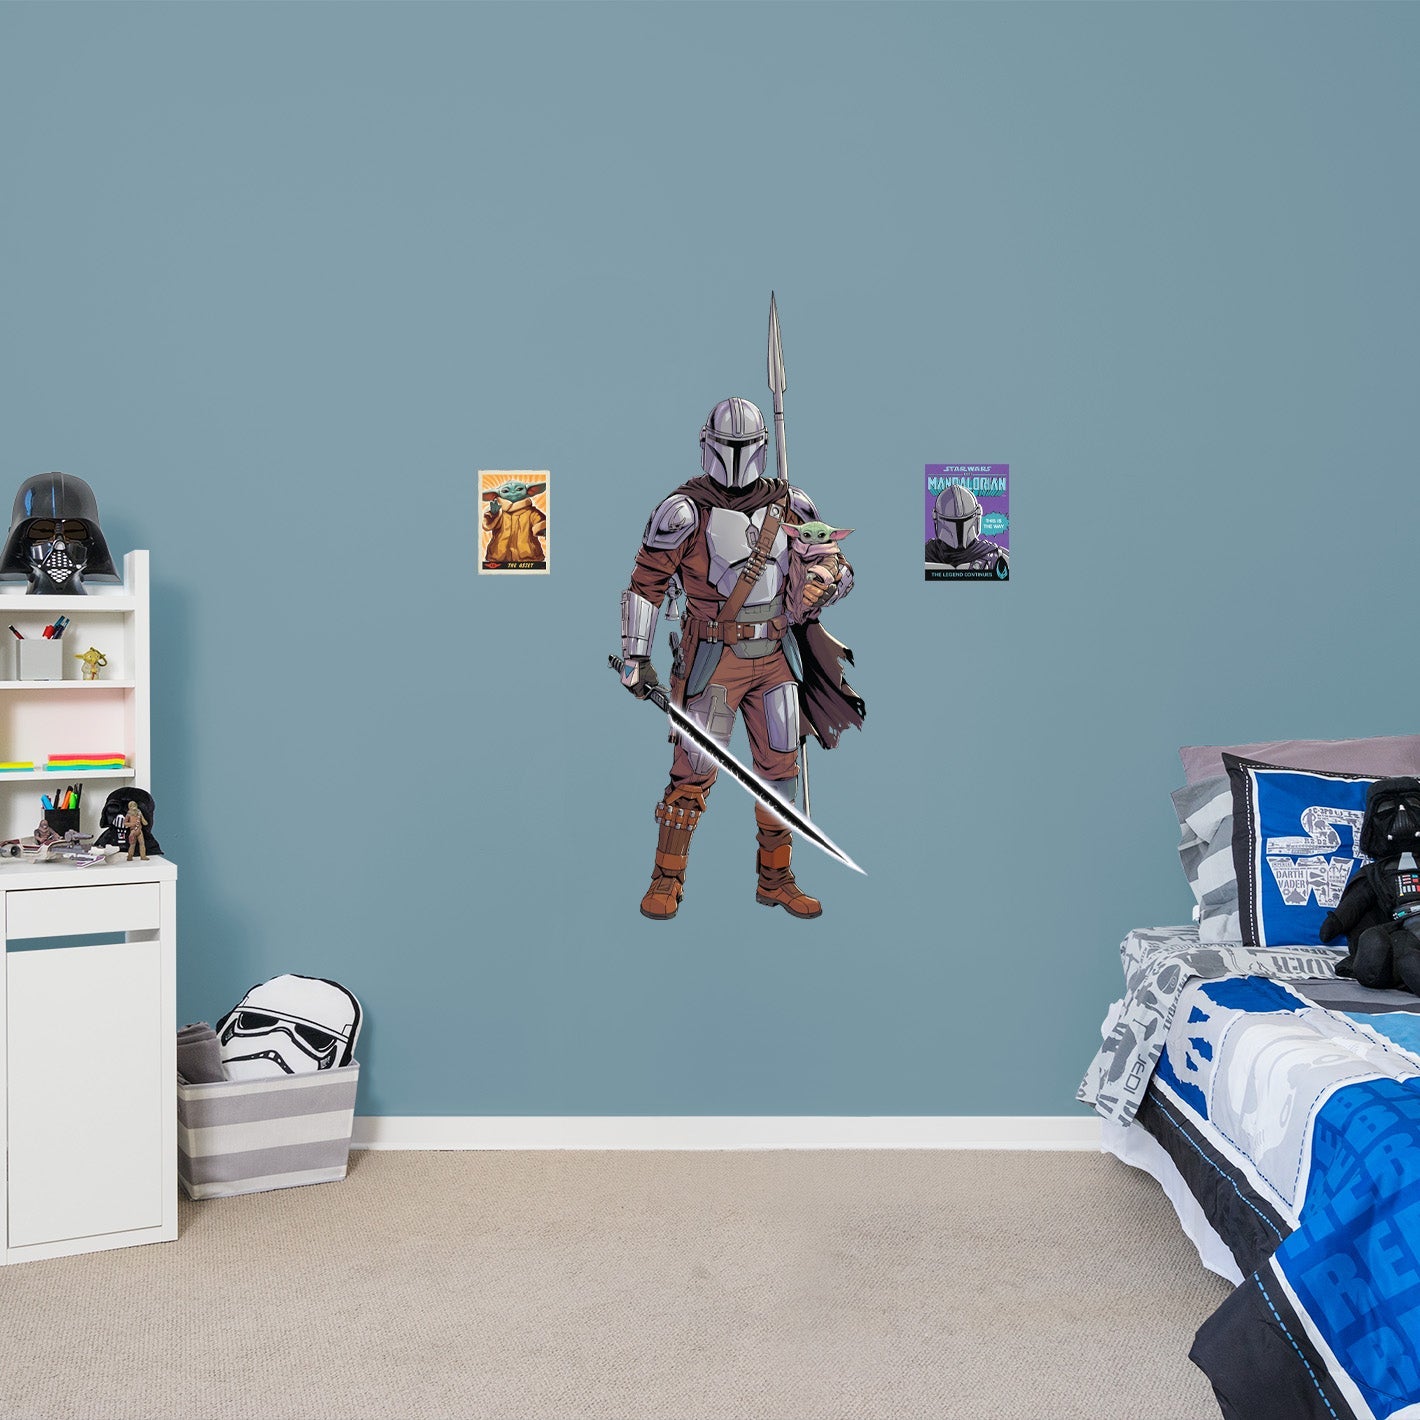 The Mandalorian: The Mandalorian & The Child Darksaber RealBig - Officially Licensed Star Wars Removable Adhesive Decal